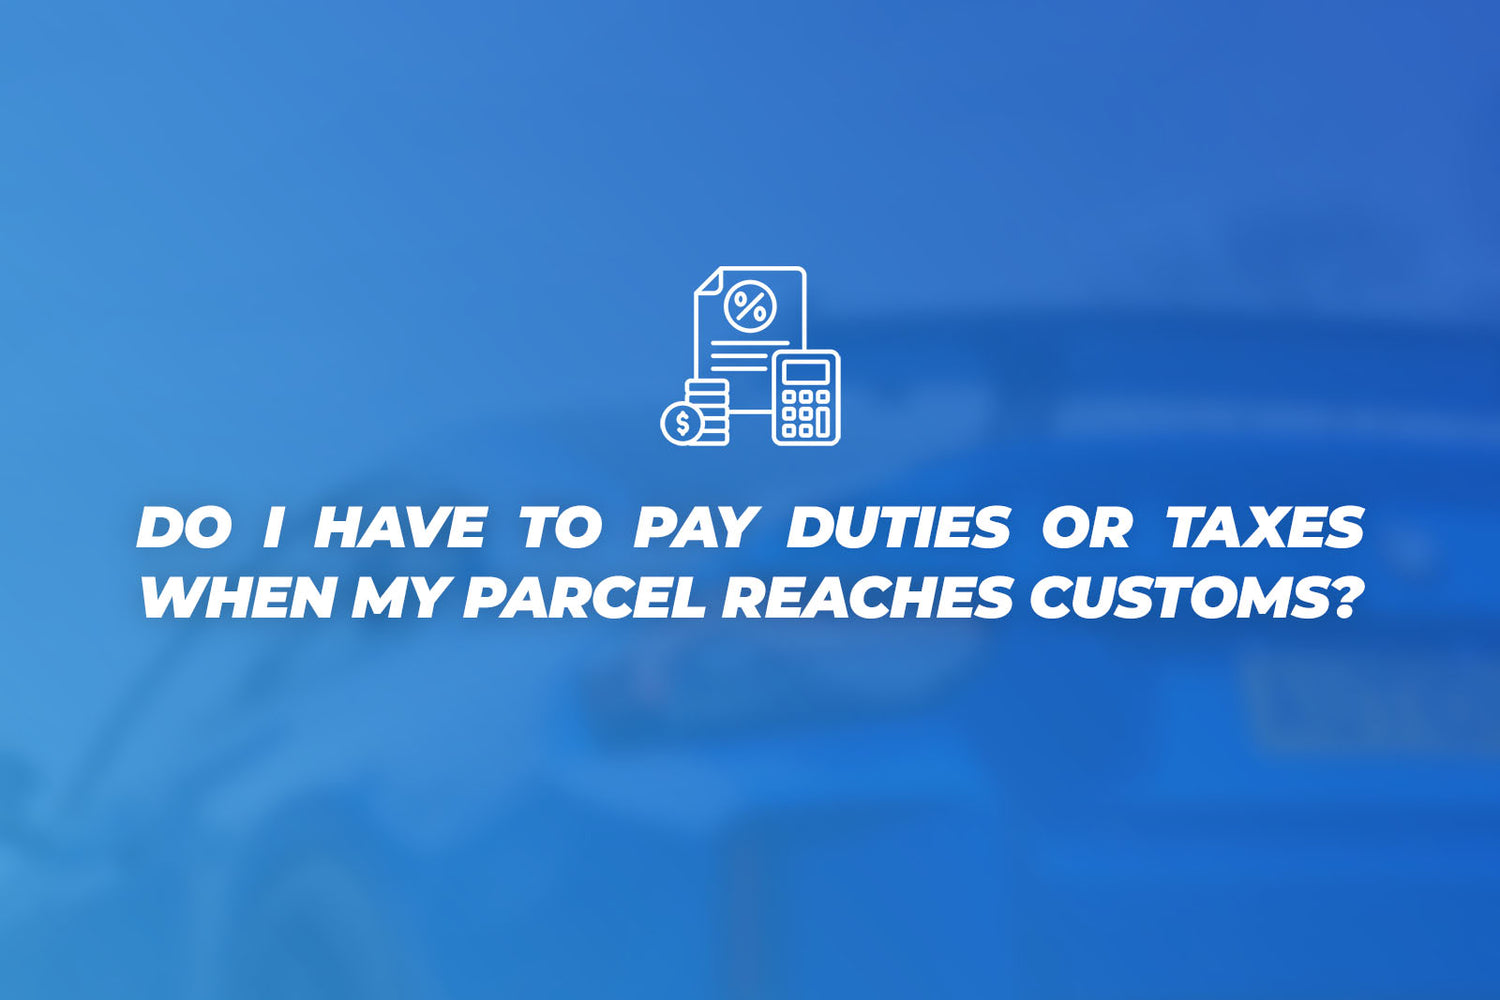 Do I have to pay extra fees when my parcel reaches customs?